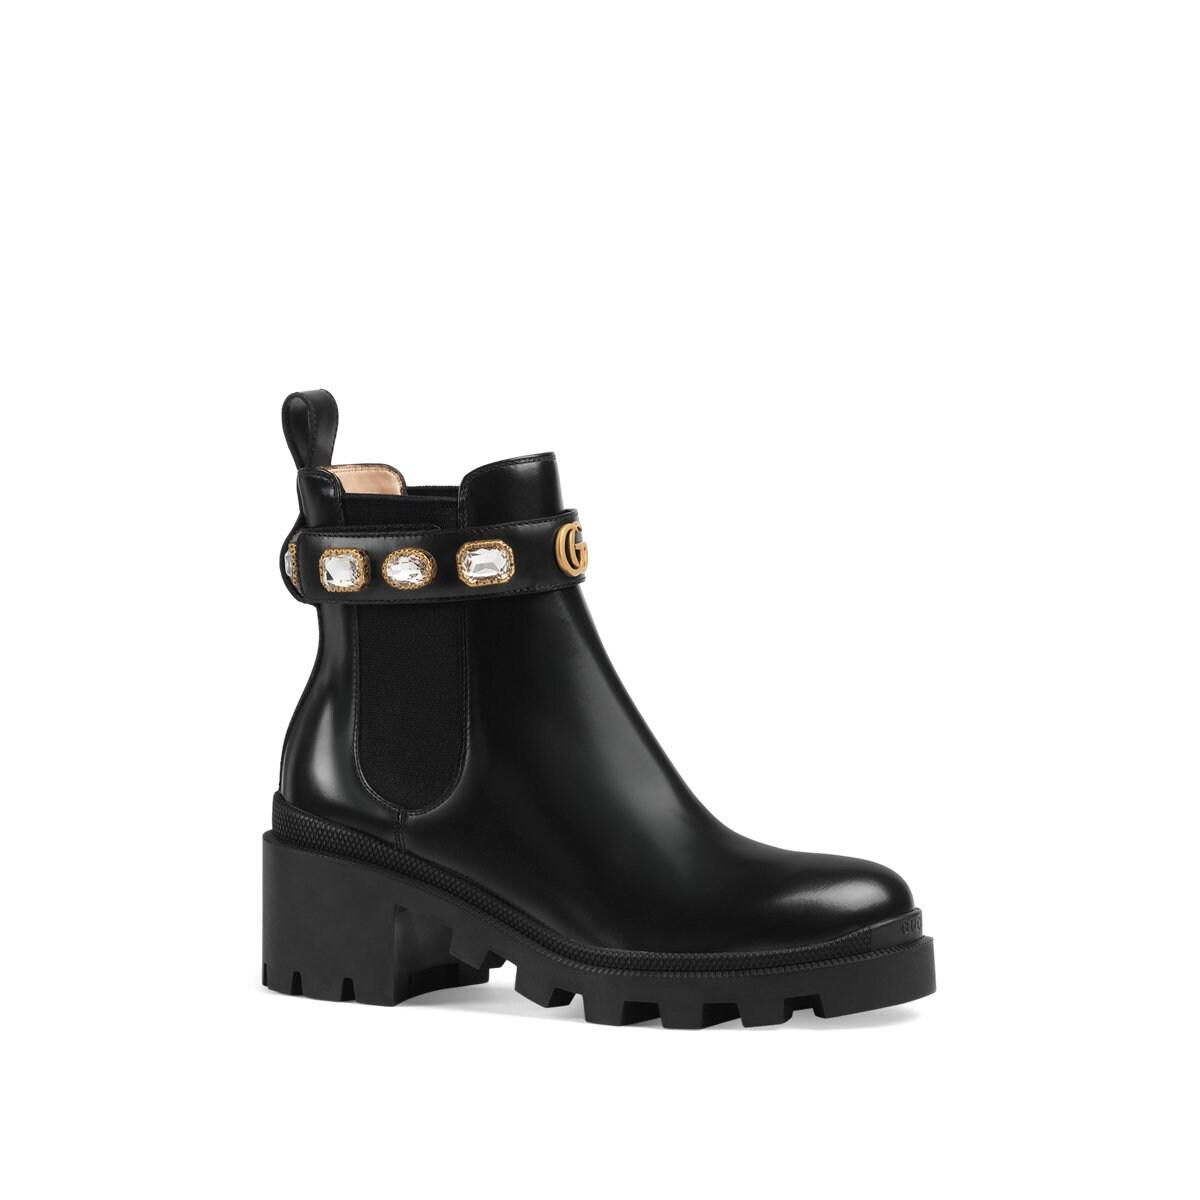 Gucci Leather Gemstone Chelsea Boots in Nero (Black) - Lyst